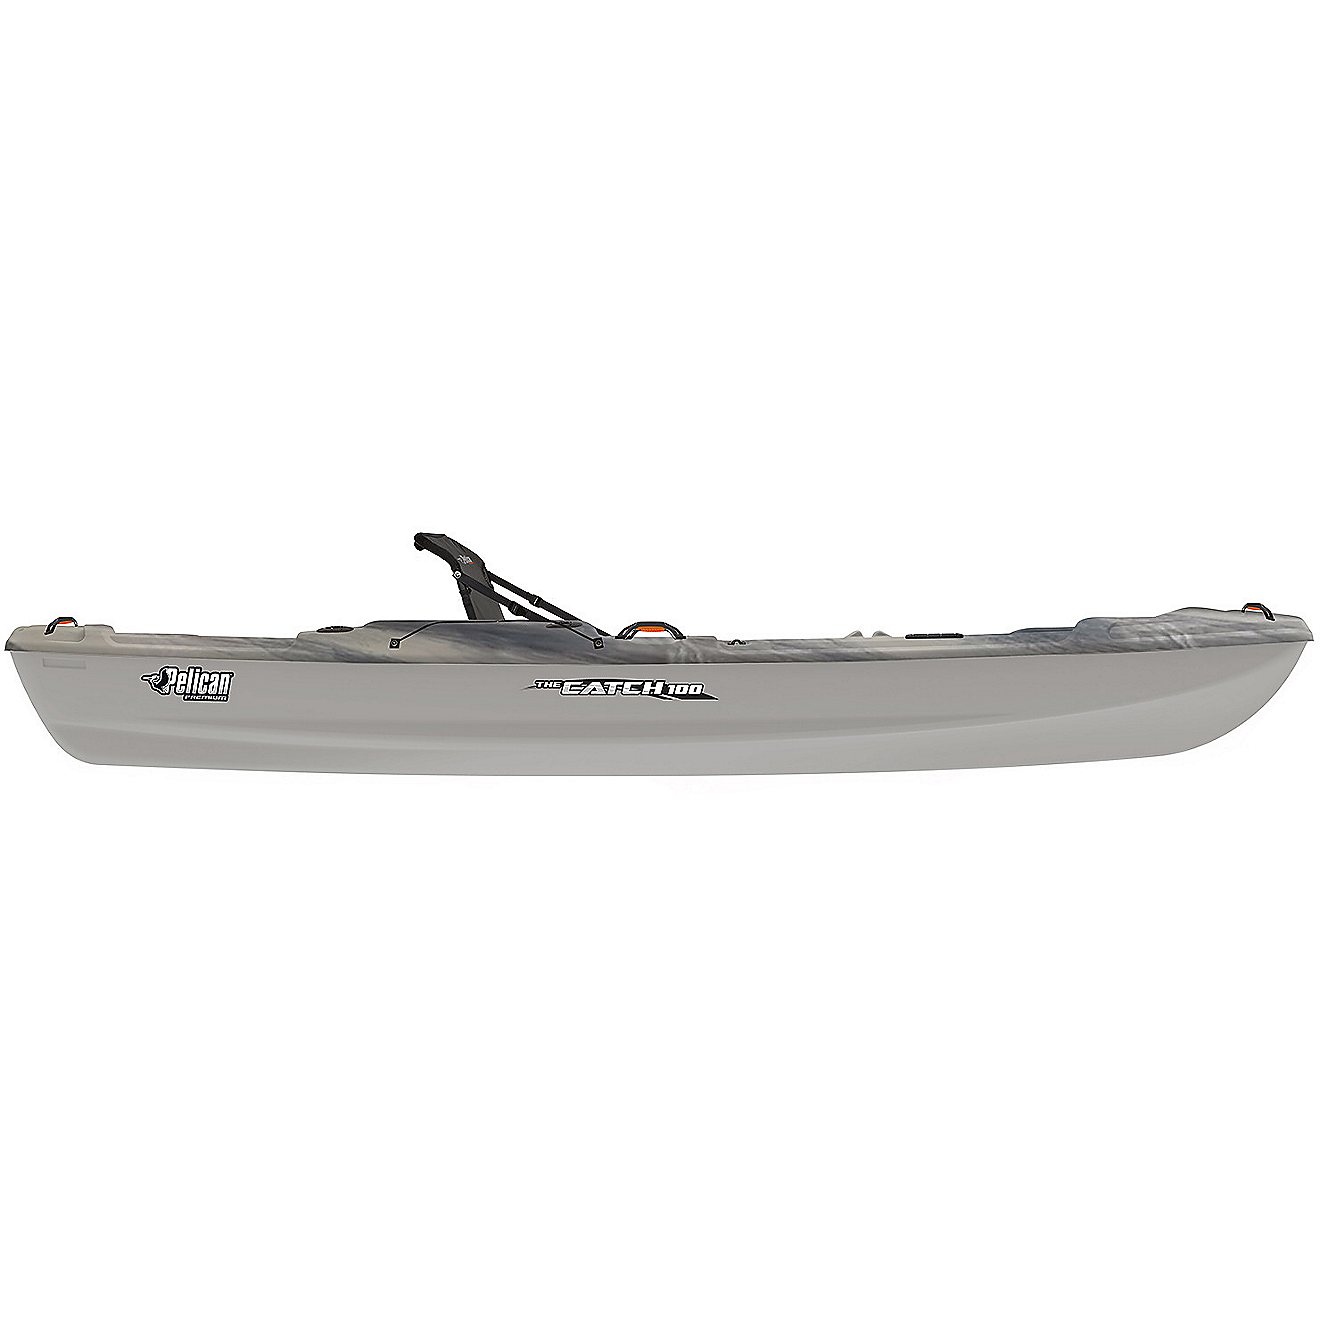 Pelican Premium The Catch 100 10 ft Sit-On-Top Fishing Kayak                                                                     - view number 4